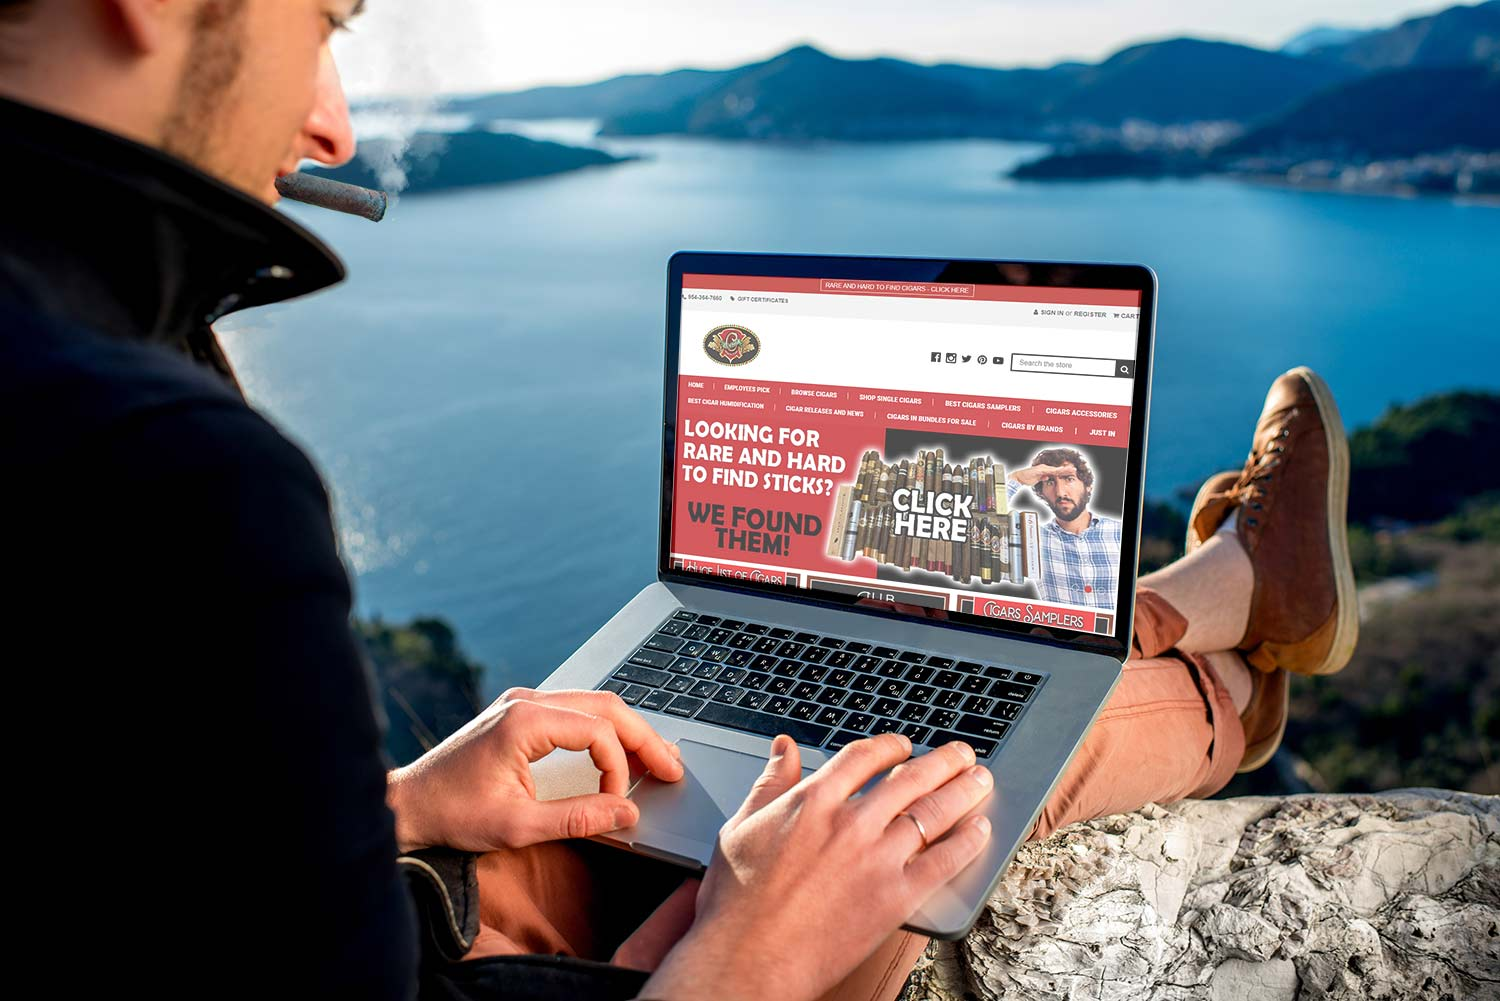 A man holding a cigar and looking at a laptop with a Cuenca Cigars website open